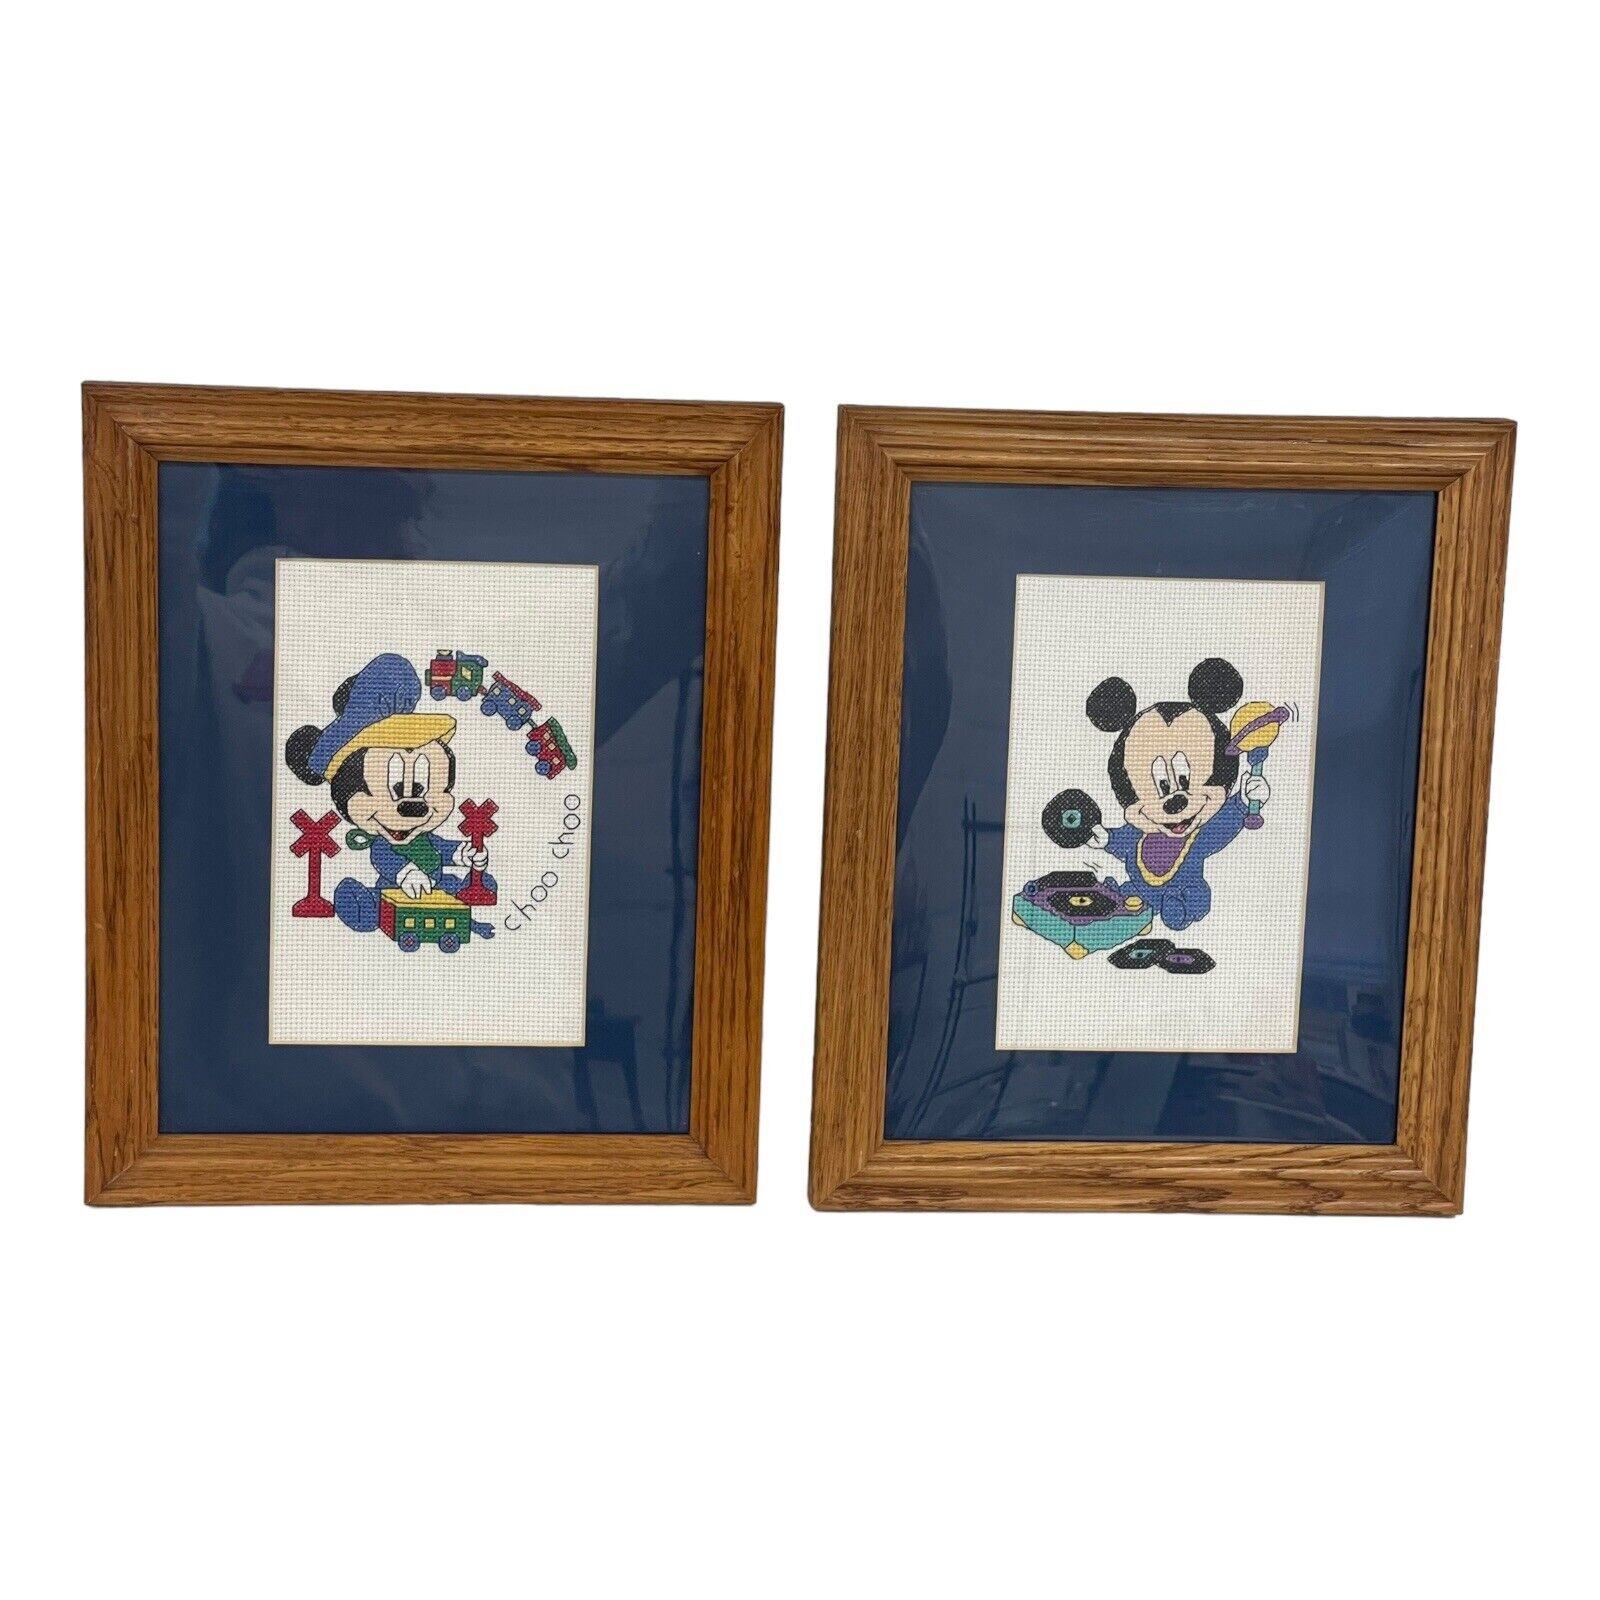 Framed 8x10 Mickey Mouse Nursery Themed Crossstitch 80’s Set Of 2